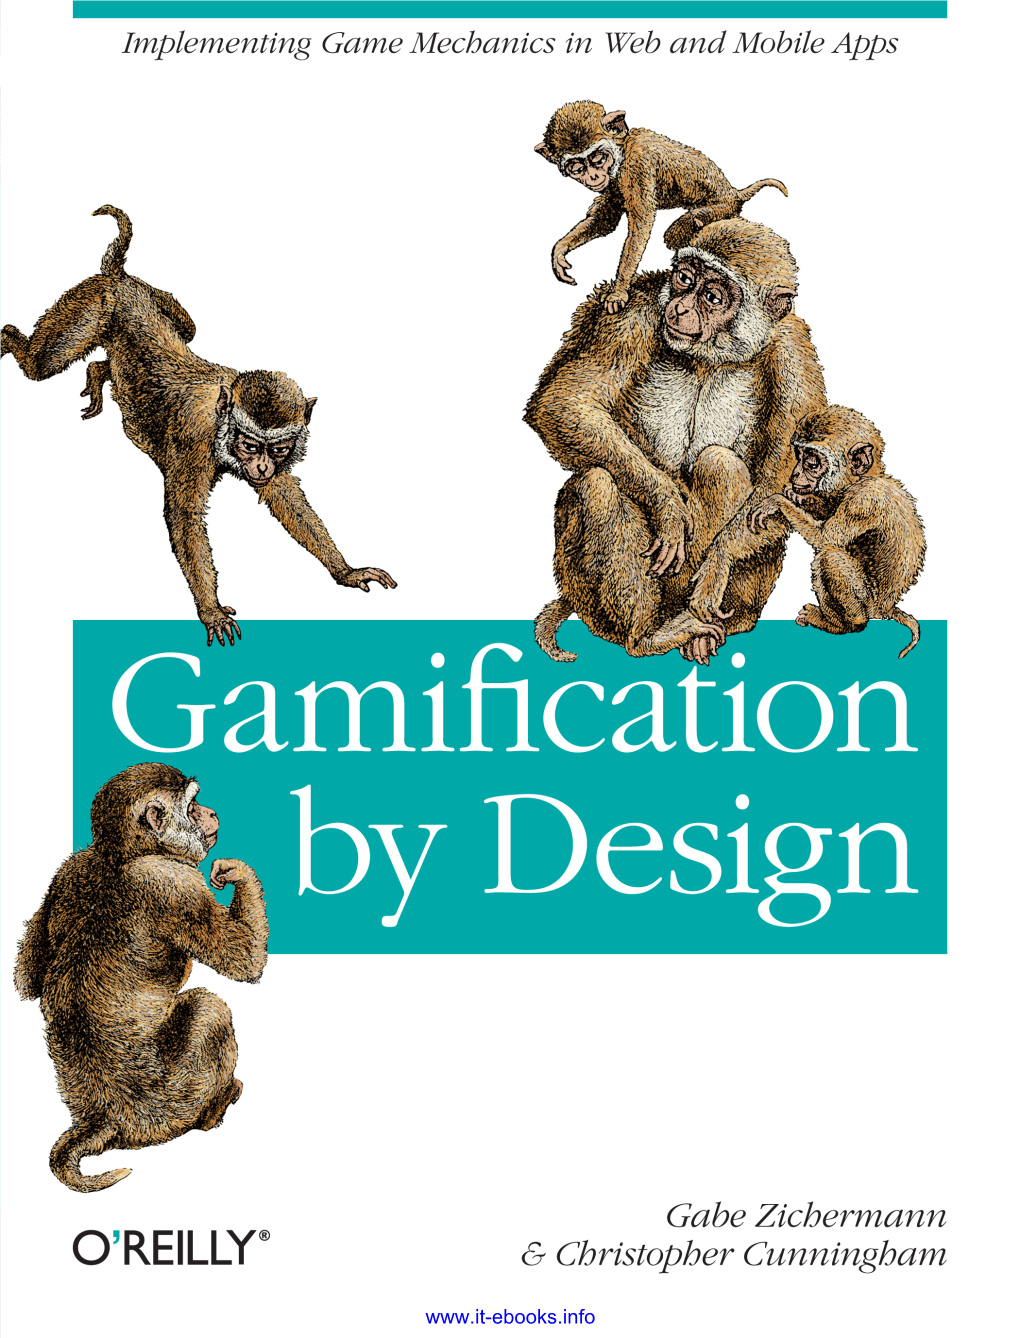 Gamification by Design Implementing Game Mechanics in Web and Mobile Apps